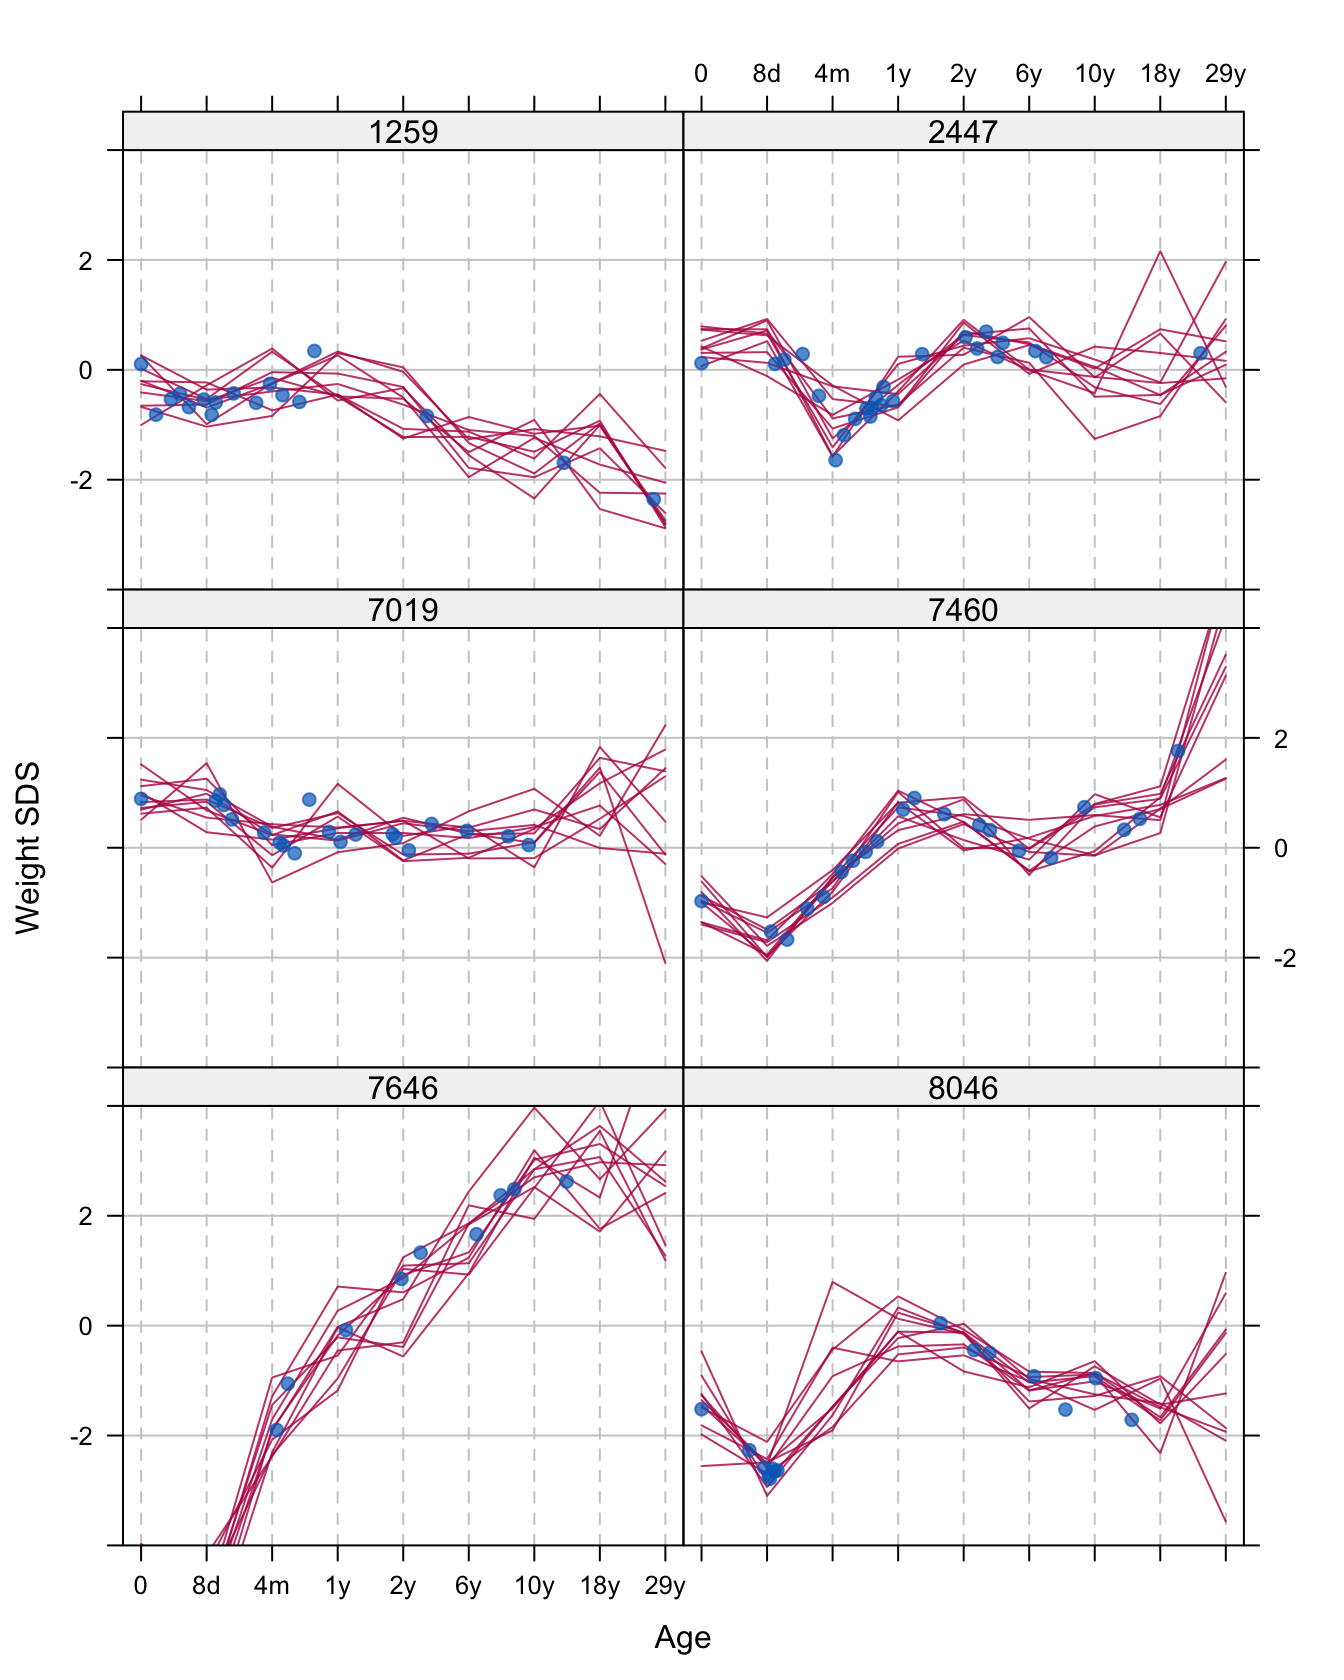 Ten multiply imputed trajectories of weight SDS for the same persons as in Figure 11.6 (in red). Also shown are the data points (in blue).